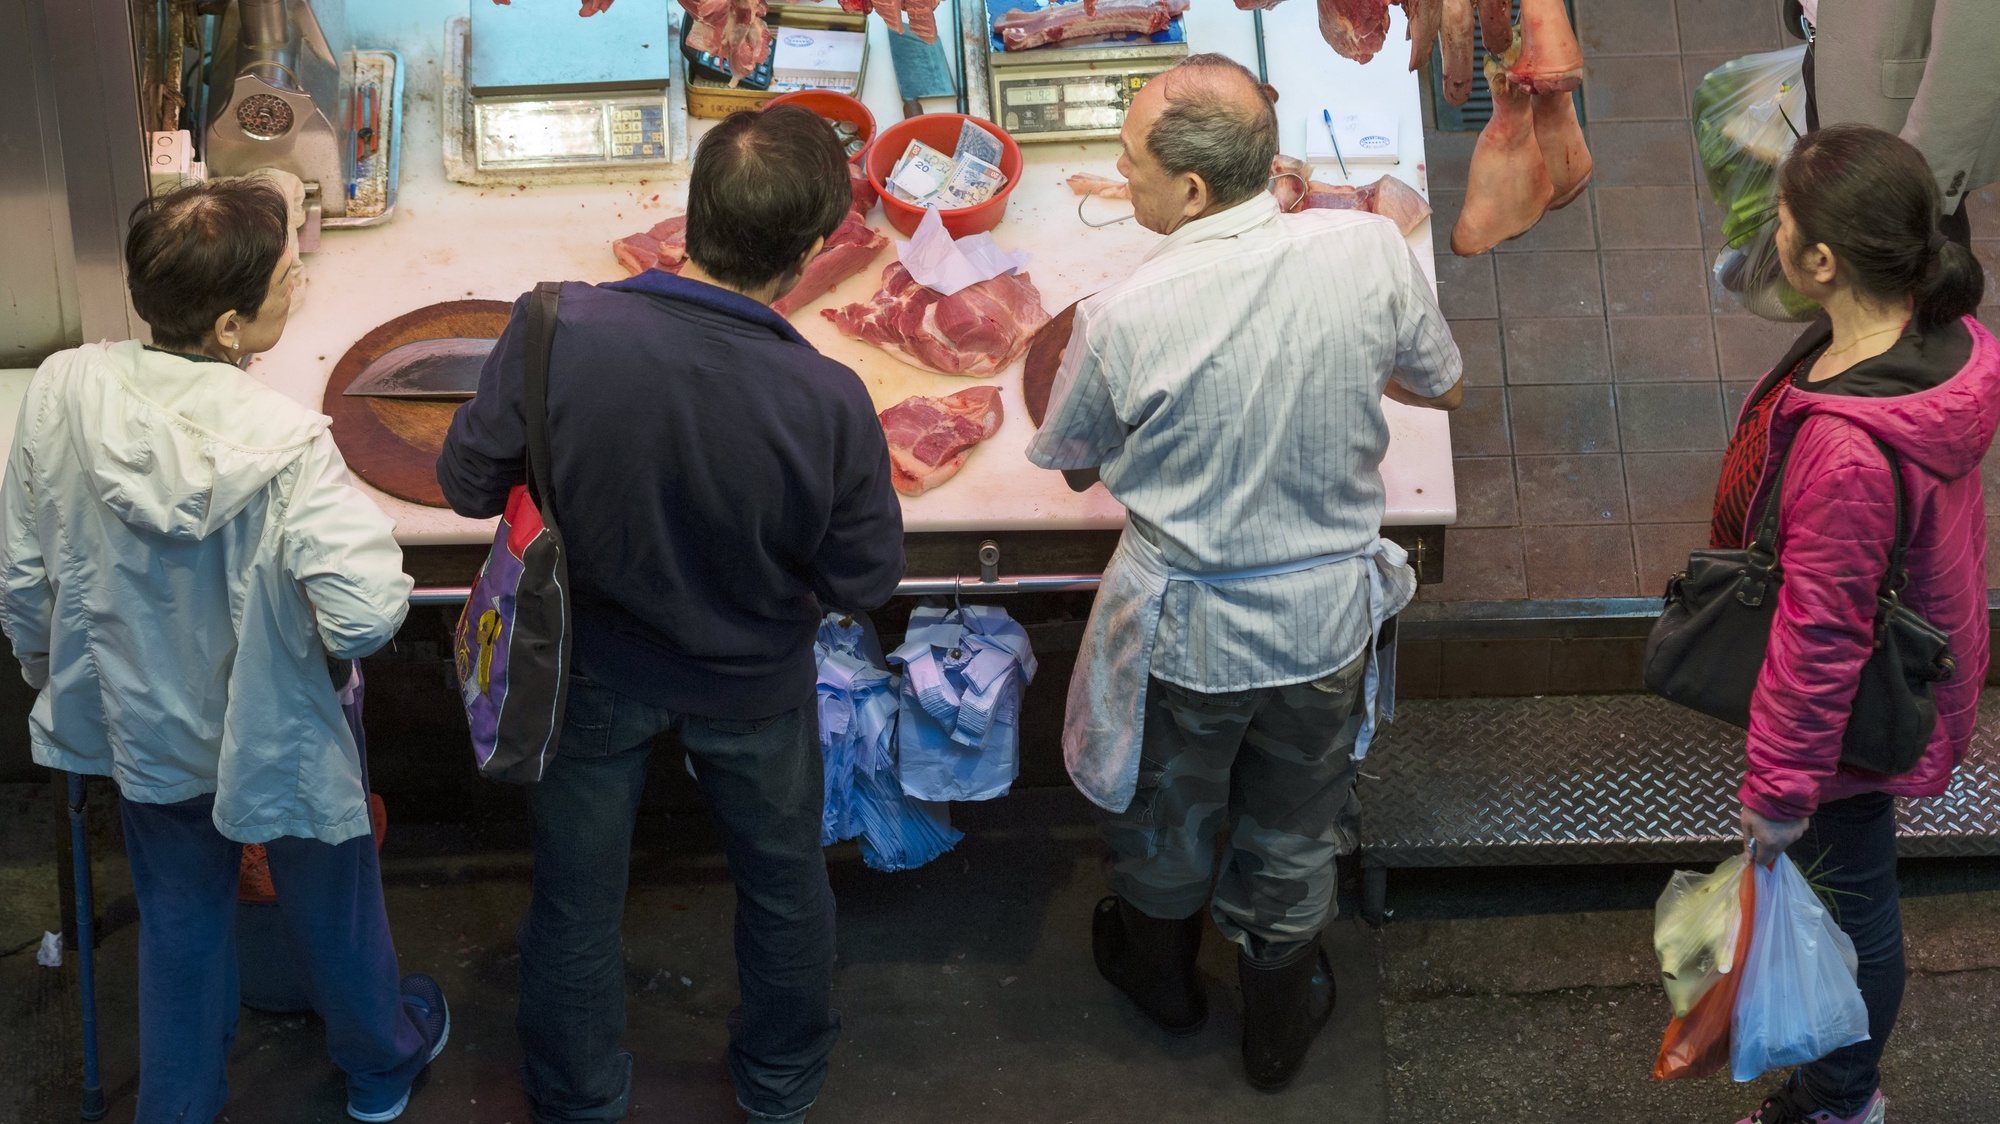 epa05862861 Patrons buy meat from a butcher stall in Hong Kong, China, 22 March 2017. Hong Kong&#039;s Center for Food Safety stated that imports of frozen and chilled meat as well as poultry from Brazil would be temporarily suspended with immediate effect as a precautionary measure due to recent reports of the sale and export of rotten meat by some of Brazil&#039;s largest meat producers.  Hong Kong Health officials confirmed on 22 March that a number of Brazilian processing plants implicated in a meat scandal in Brazil had supplied products to Hong Kong.  EPA/JEROME FAVRE